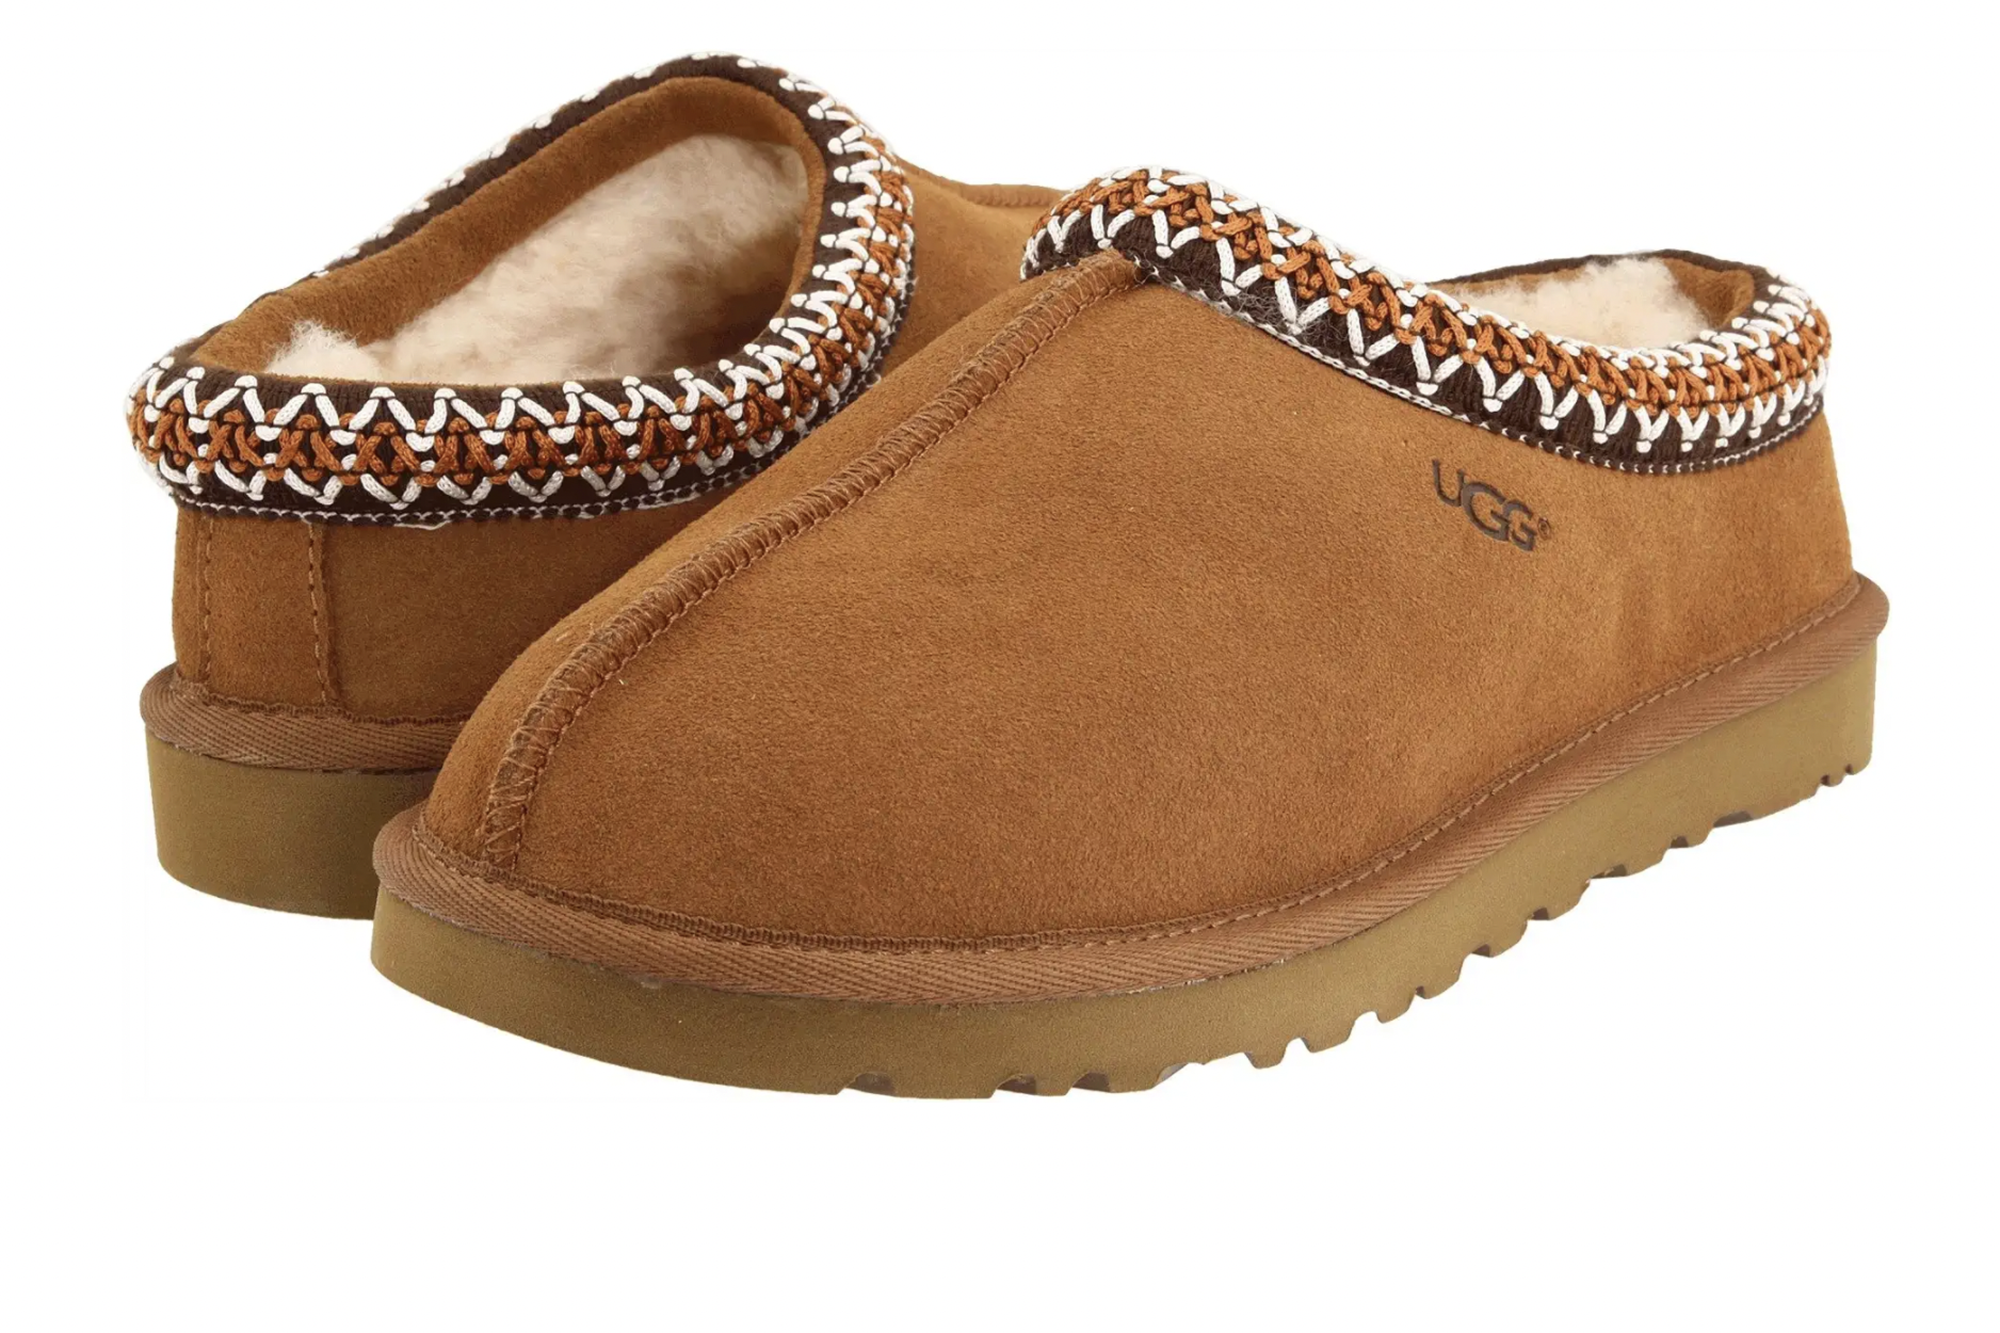 Shop These Cozy Ugg Slippers Worn by